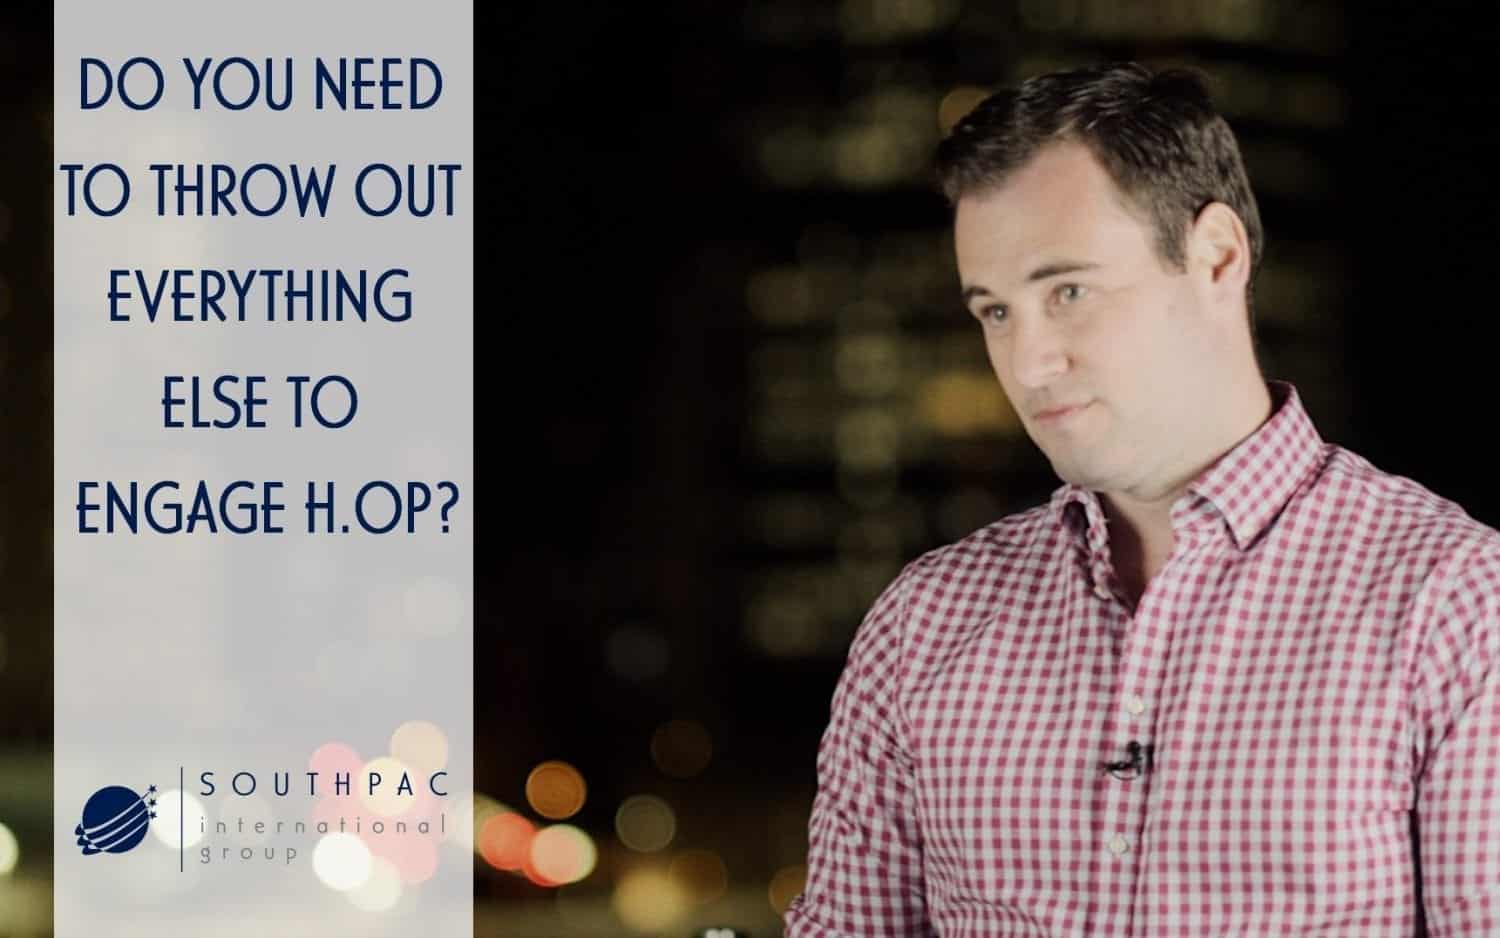 HOPLAB CEO Andy Shone answers “Do you need to throw out everything else to engage H.OP?”